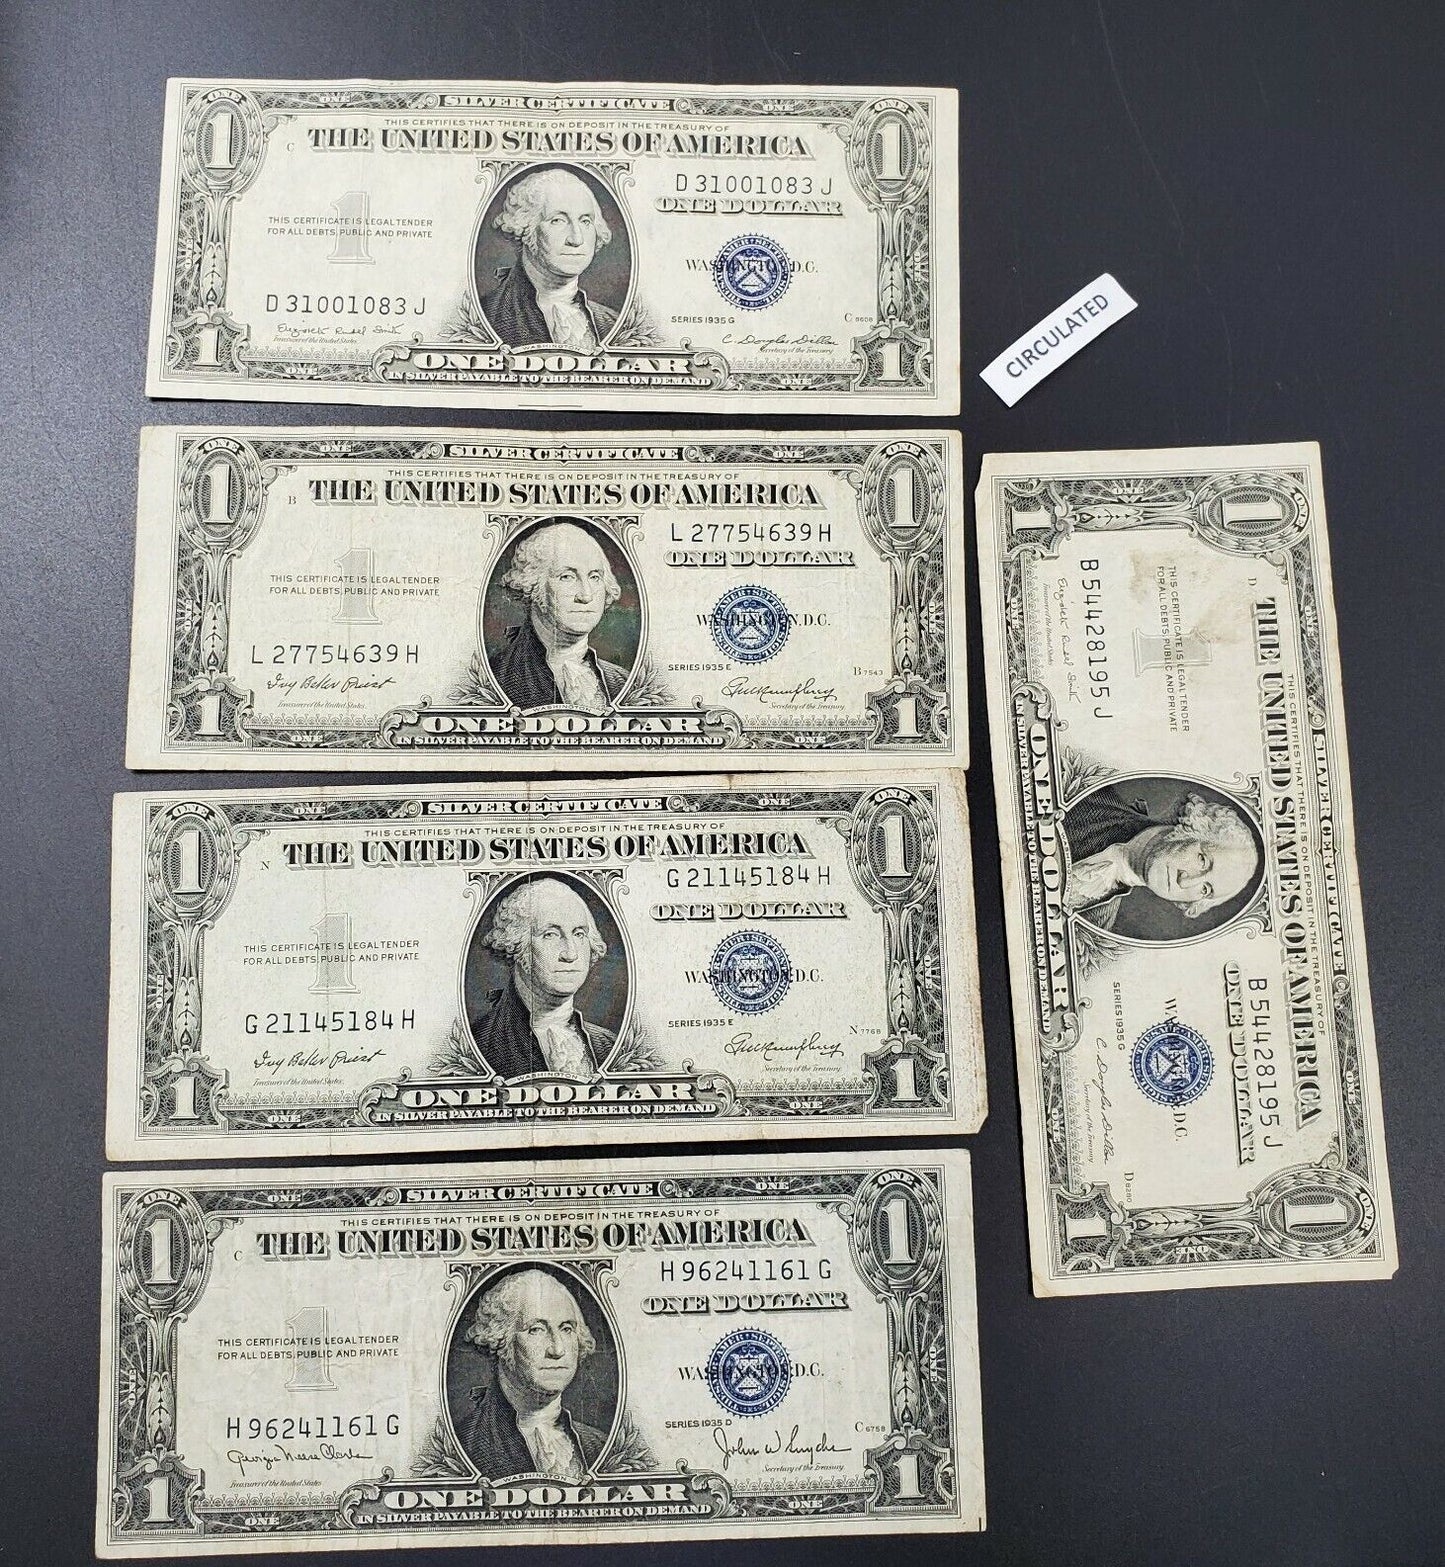 LOT 5 Note 1935 $1 SILVER CERTIFICATE NOTE BILL BLUE SEAL Repeat Serial #s VG+